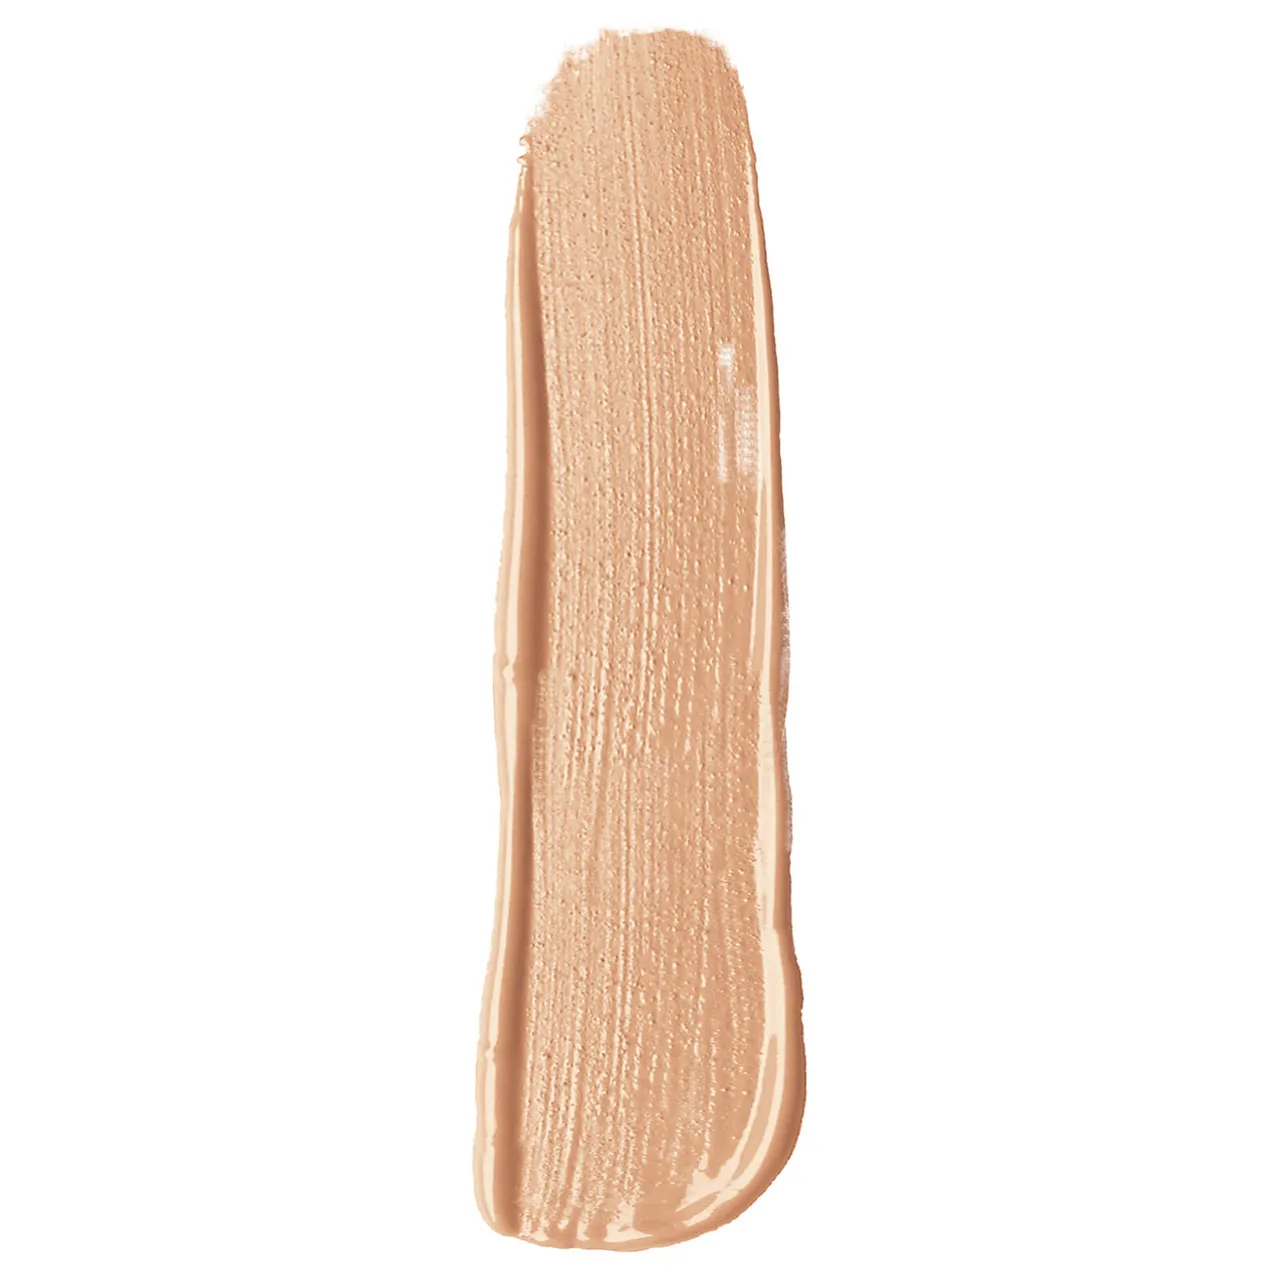 Rimmel Match Perfection Concealer 7ml (Various Shades) - Classic Ivory